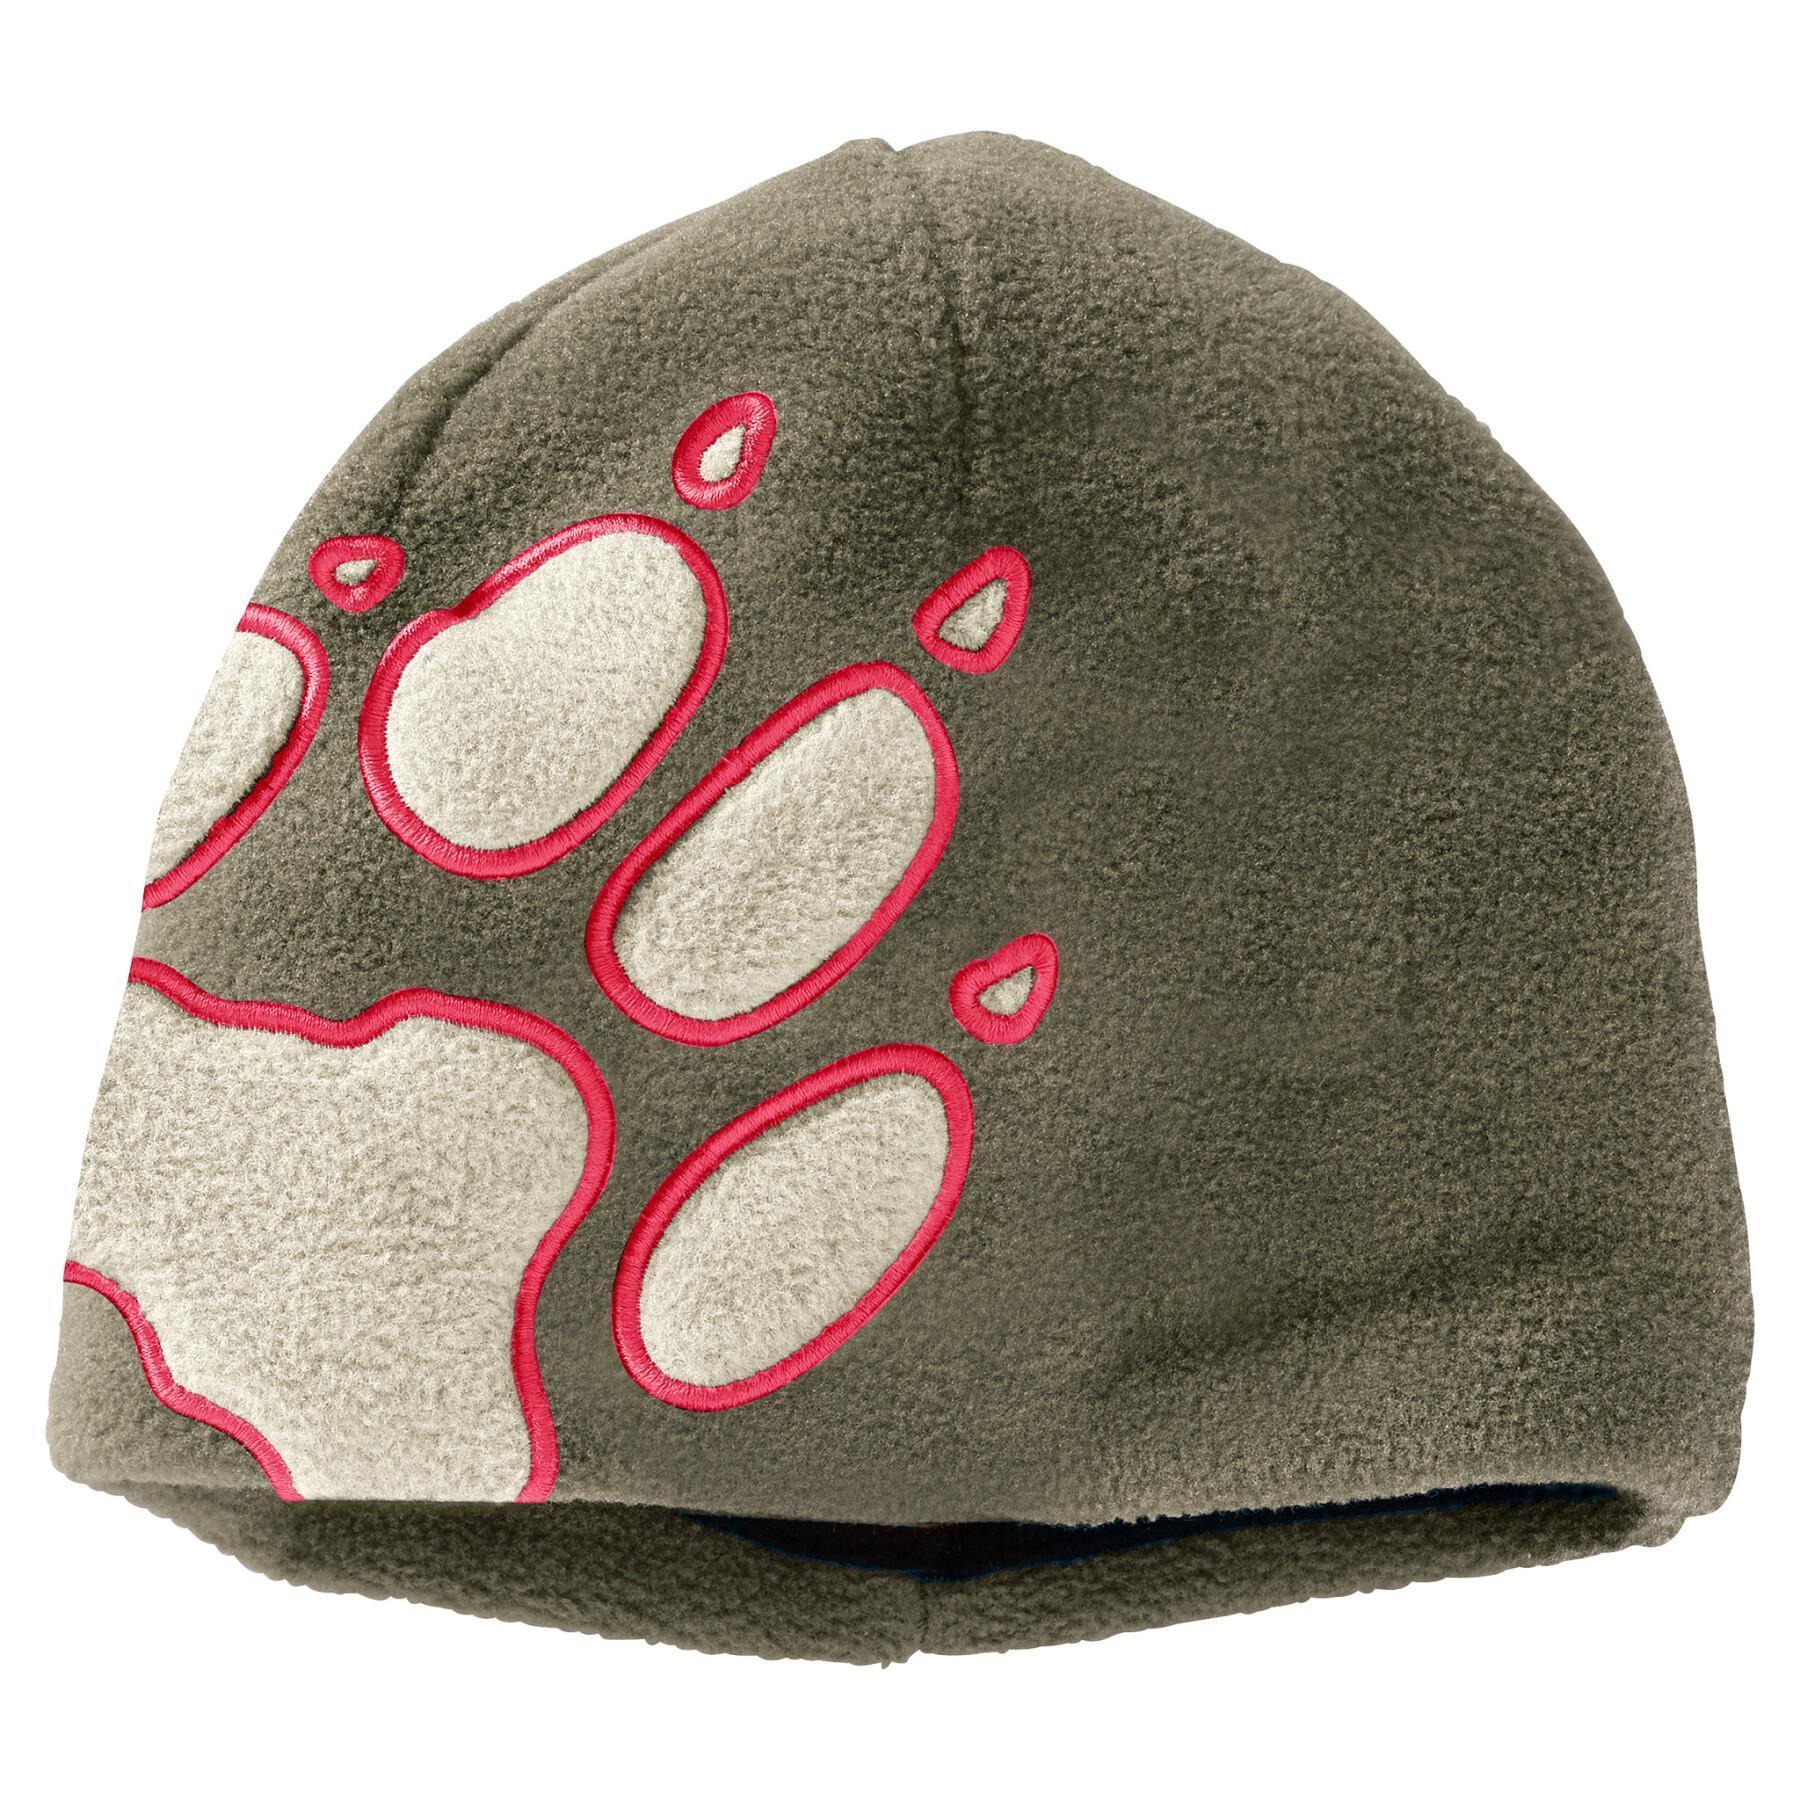 Cappello per bambini Jack Wolfskin front paw hat